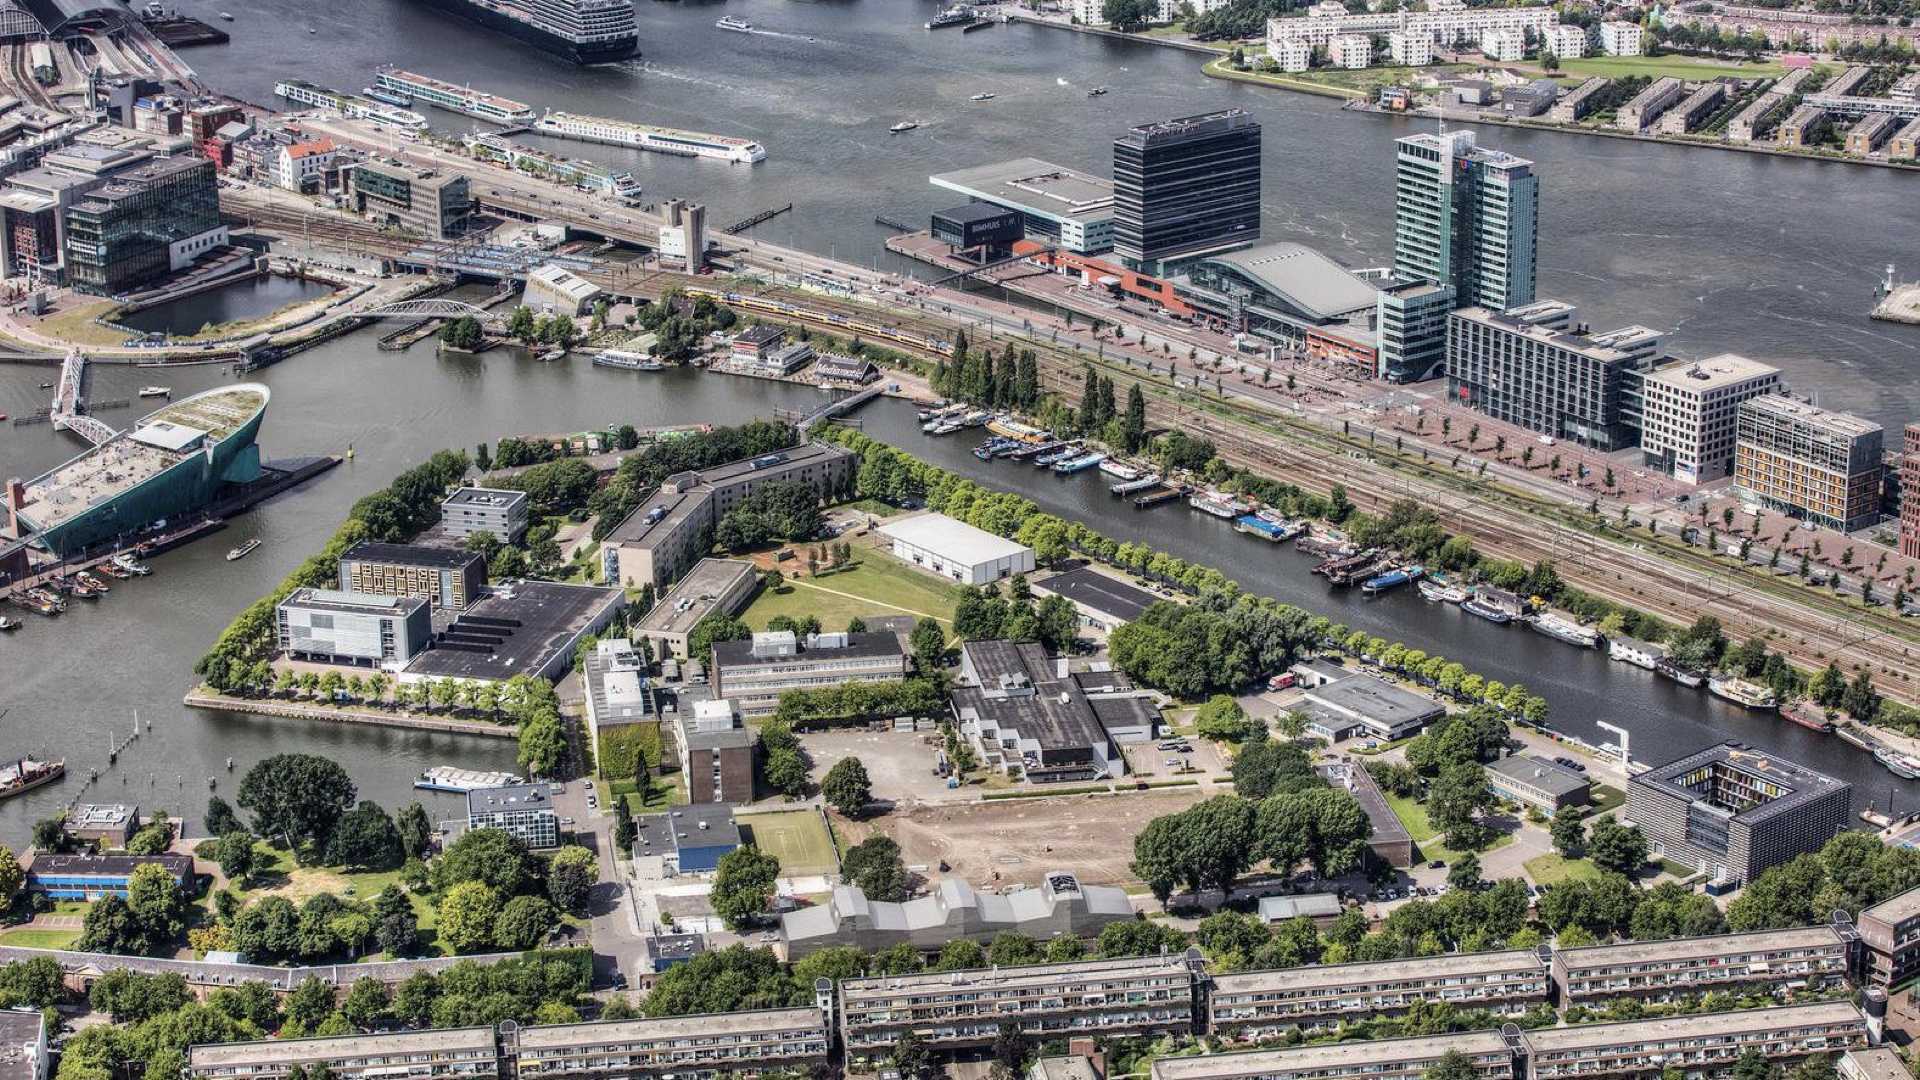 Aerial Picture of the Marineterrein district located in Amsterdam, the Netherlands